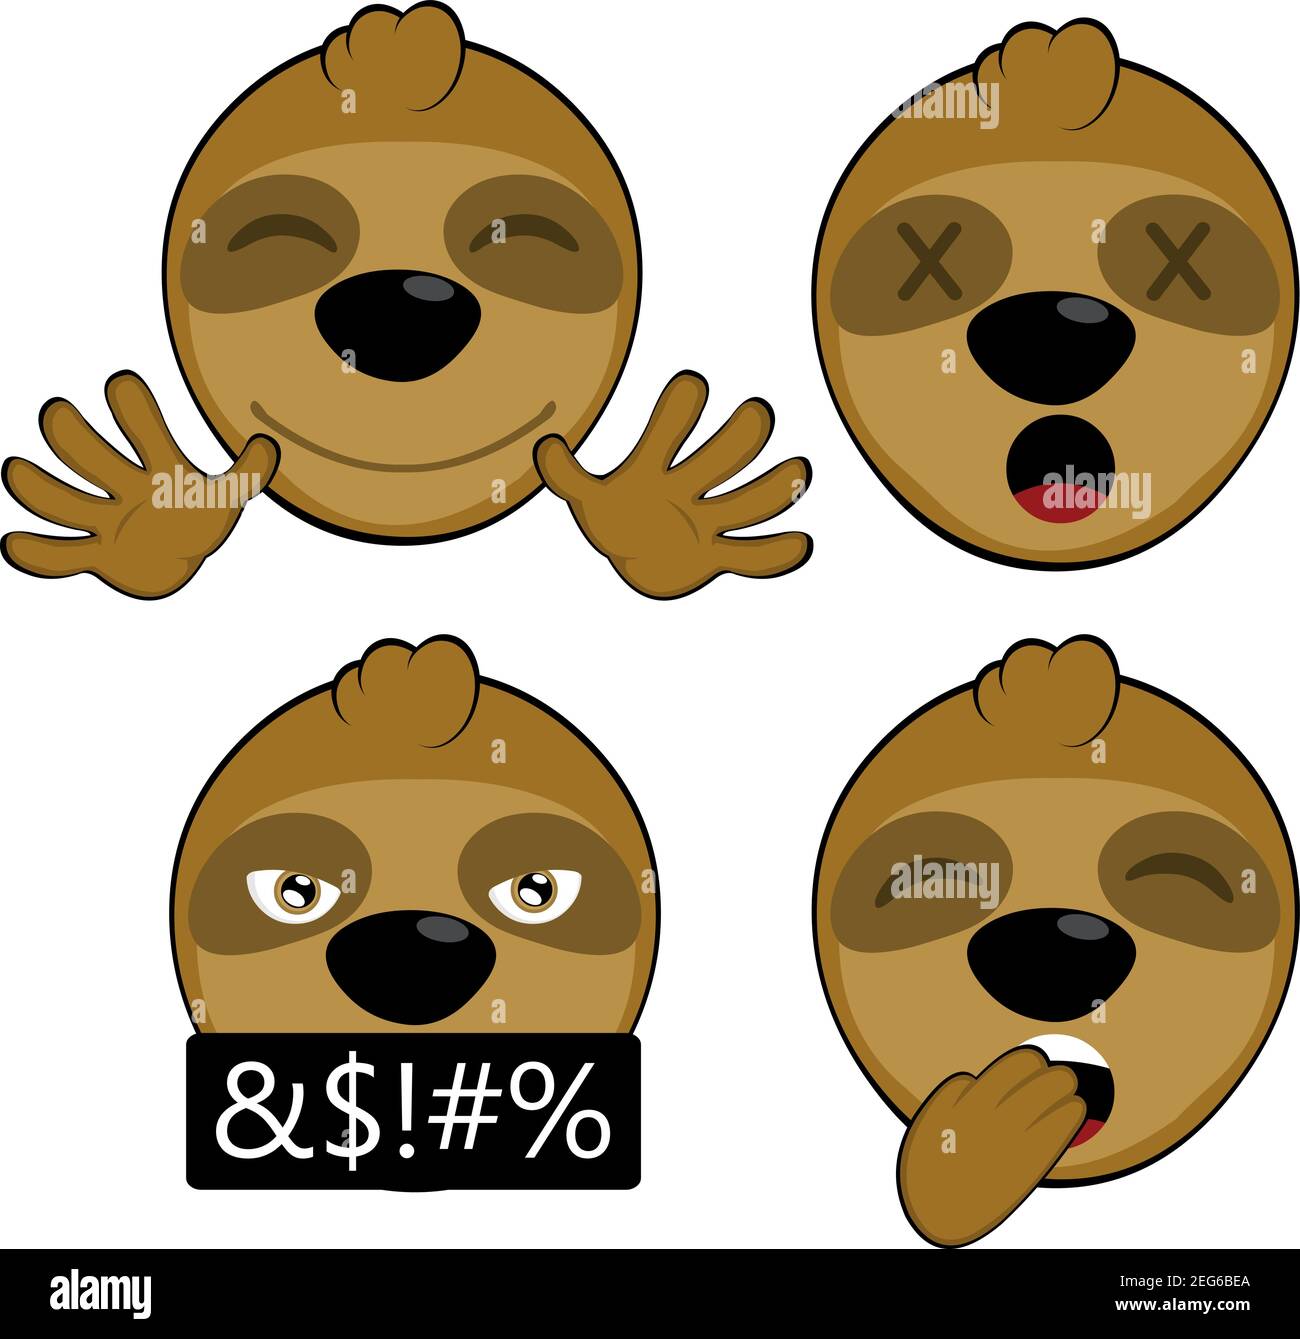 Vector illustration cartoon of a sloth with various expressions: yawning, smiling, cursing, dead eyes Stock Vector